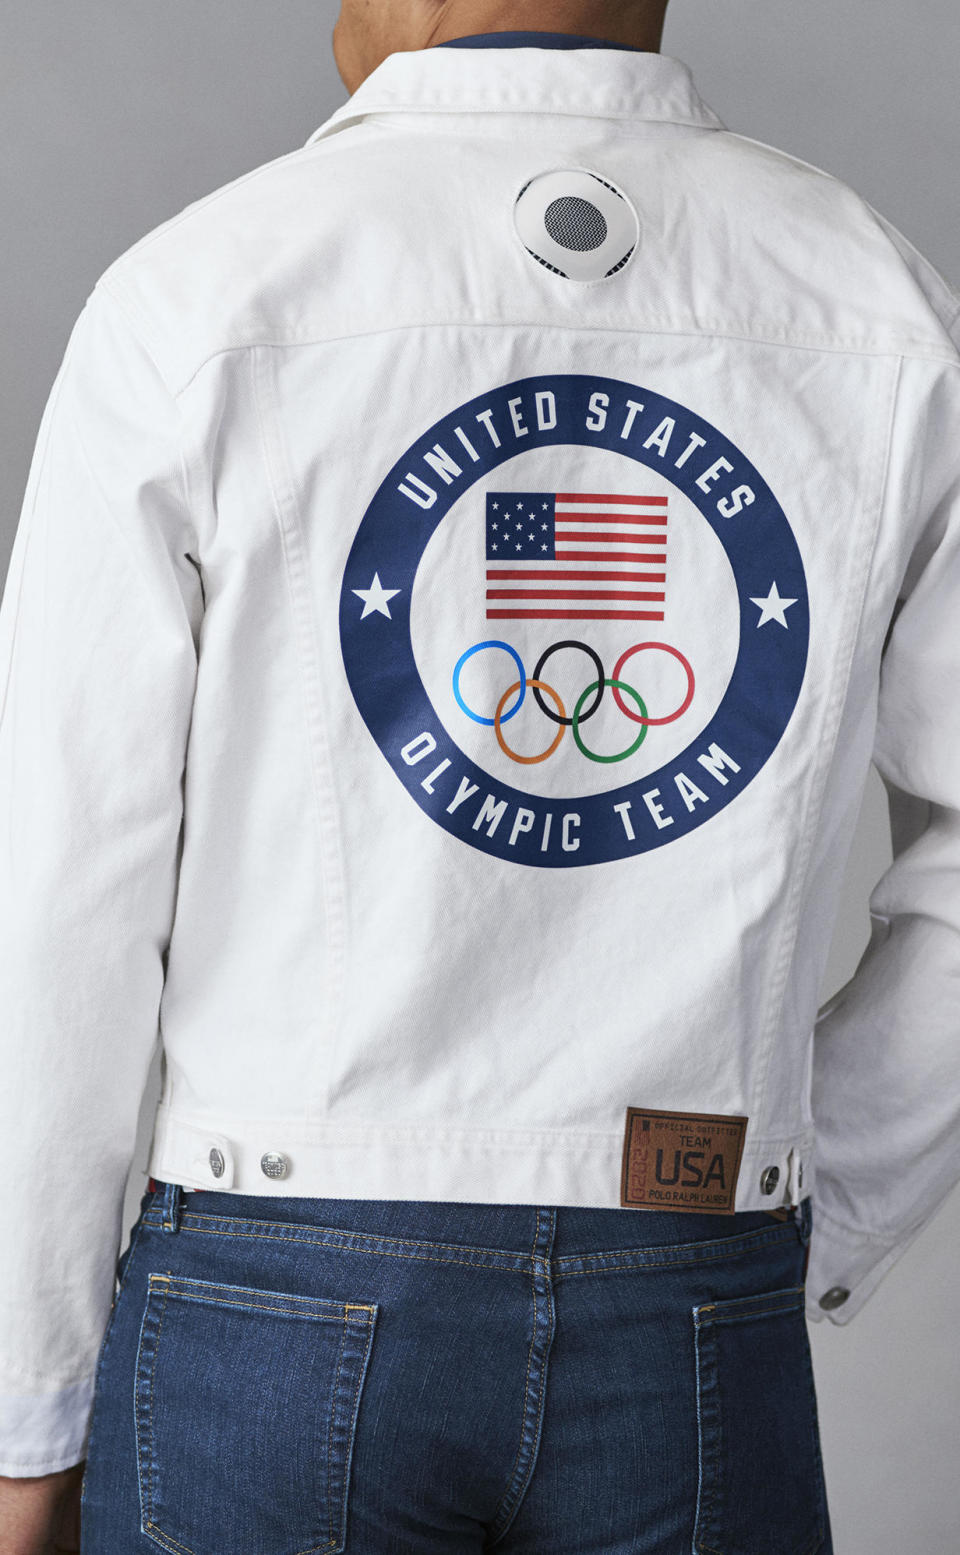 The white denim jacket will be worn by the flag-bearers at the Olympic and Paralympic opening ceremonies. RL Cooling is embedded at the top of the jacket.  / Credit: Joel Griffith